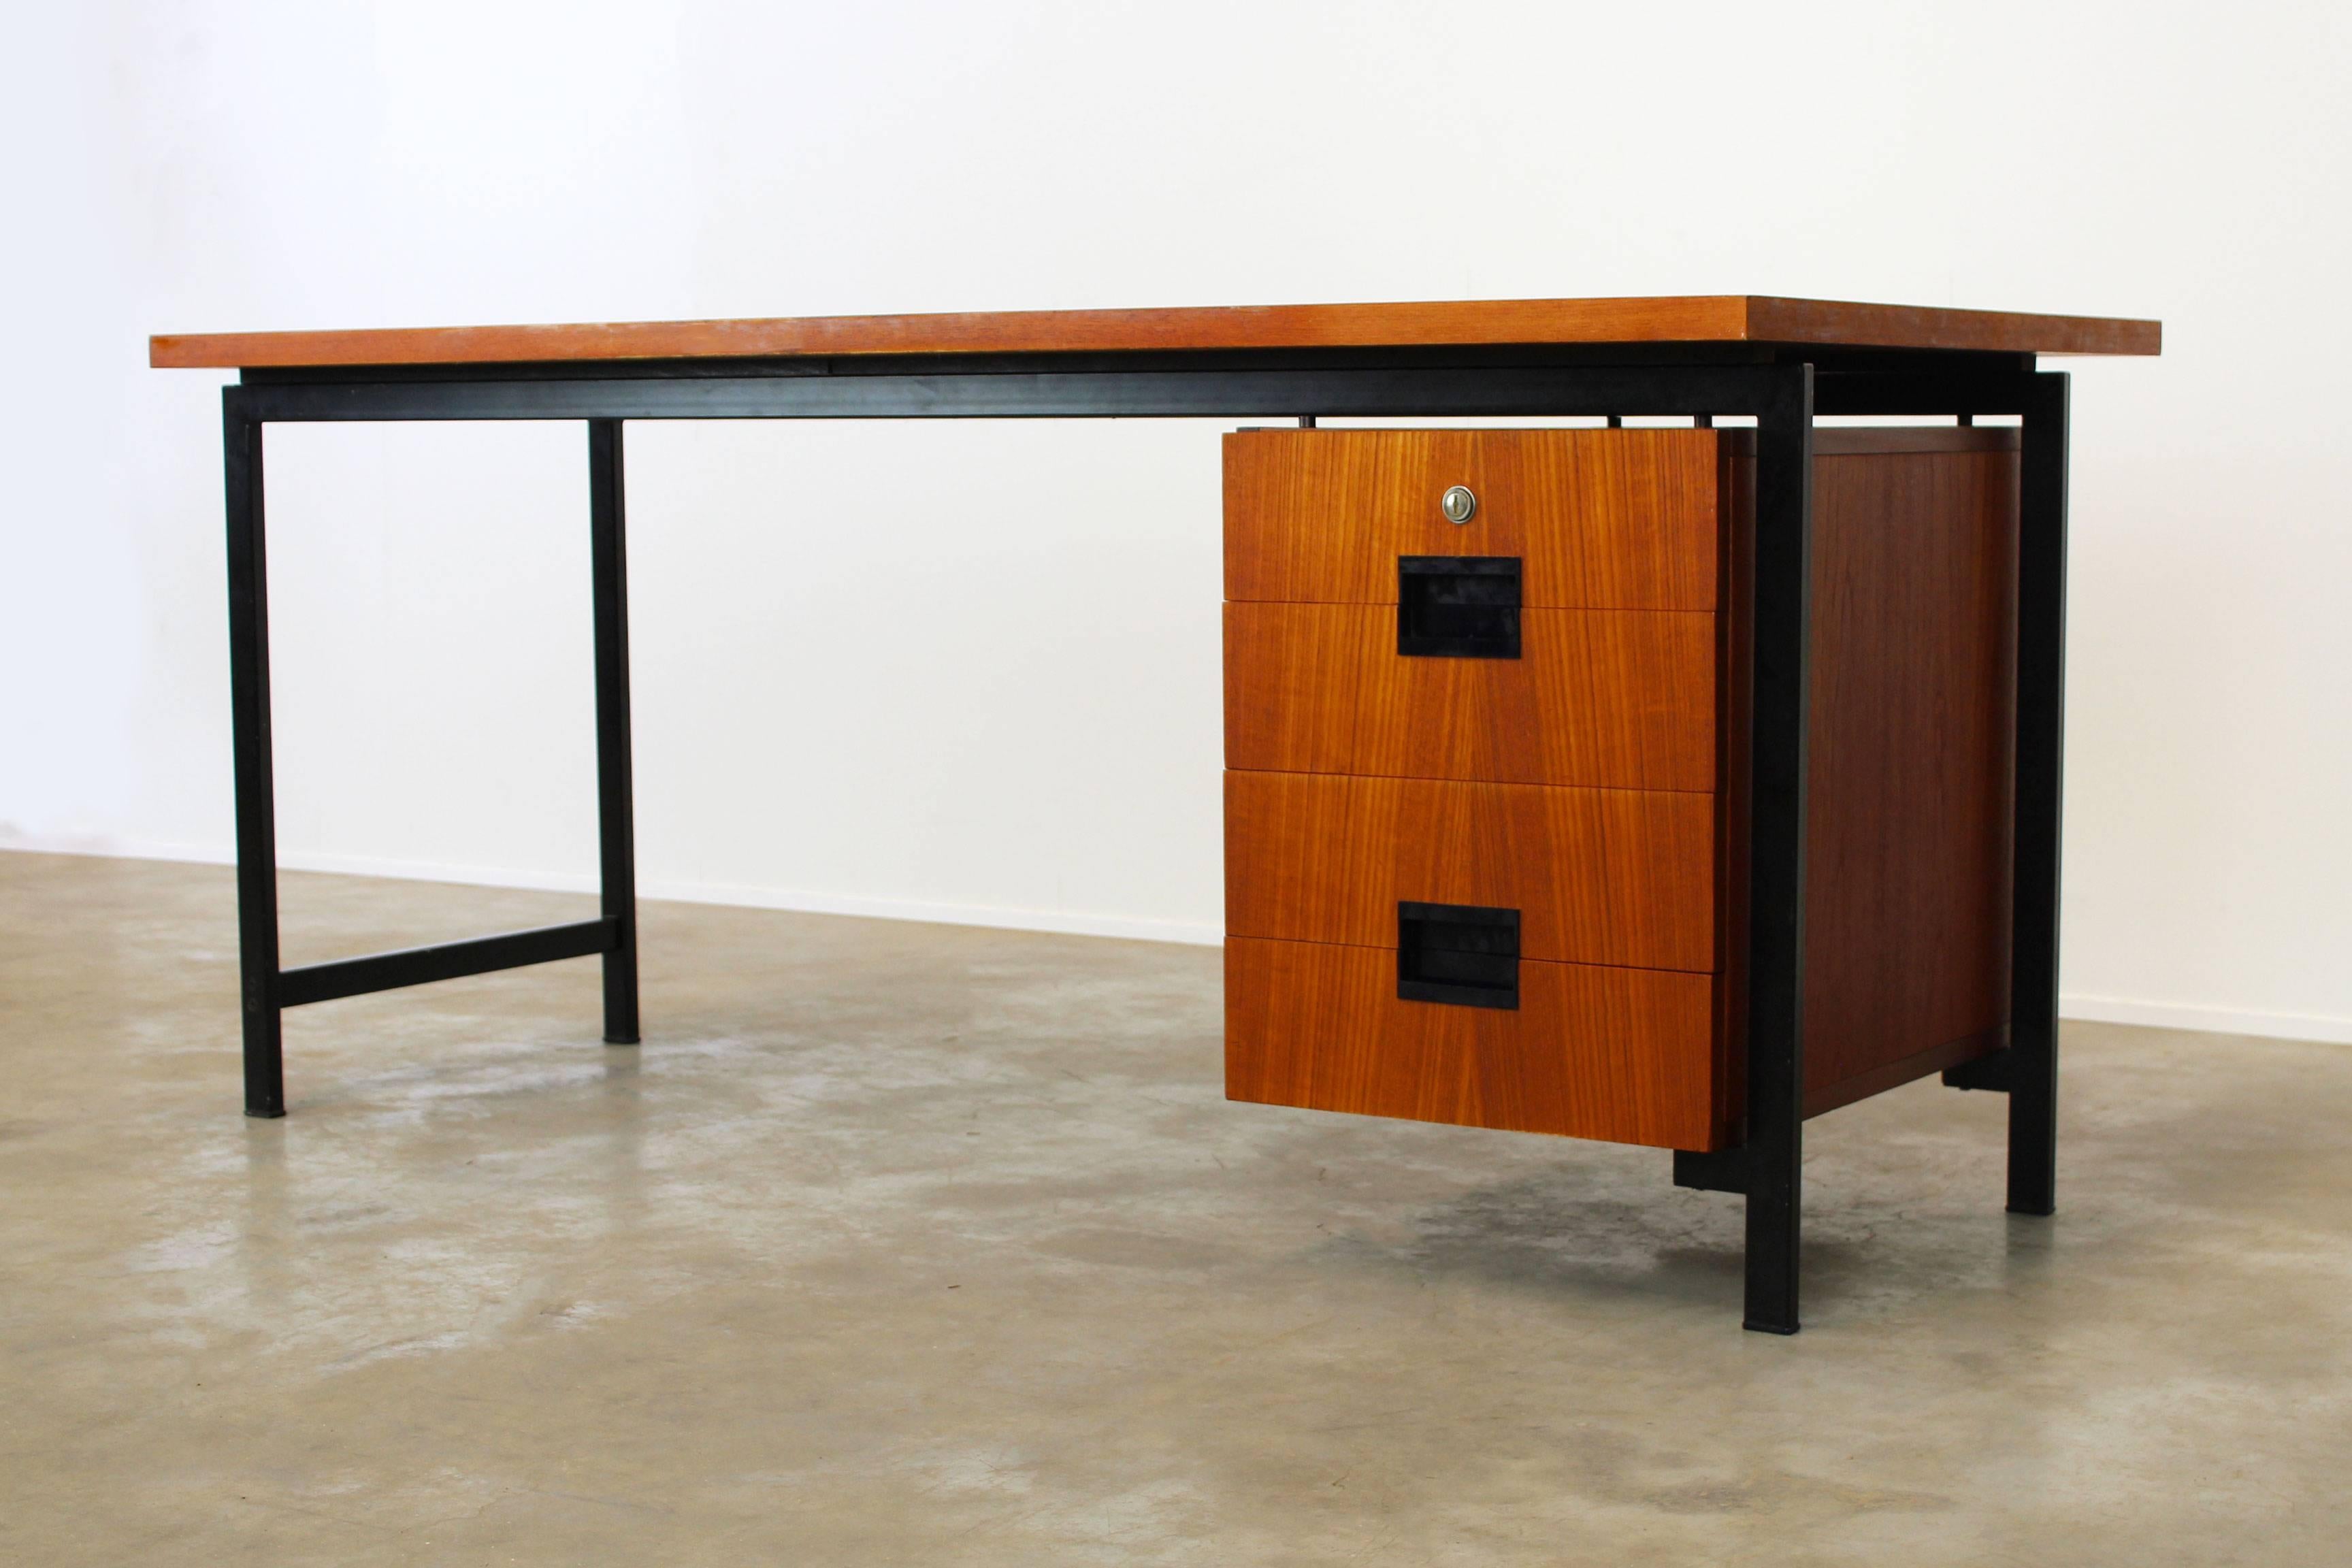 Large EU02 Japanese series desk designed by Cees Braakman for Pastoe. Rare EU02 model with only right side drawers instead of usual double sided drawers. Wonderful and rare desk with teak and Minimalist black metal frame. This desk can be used